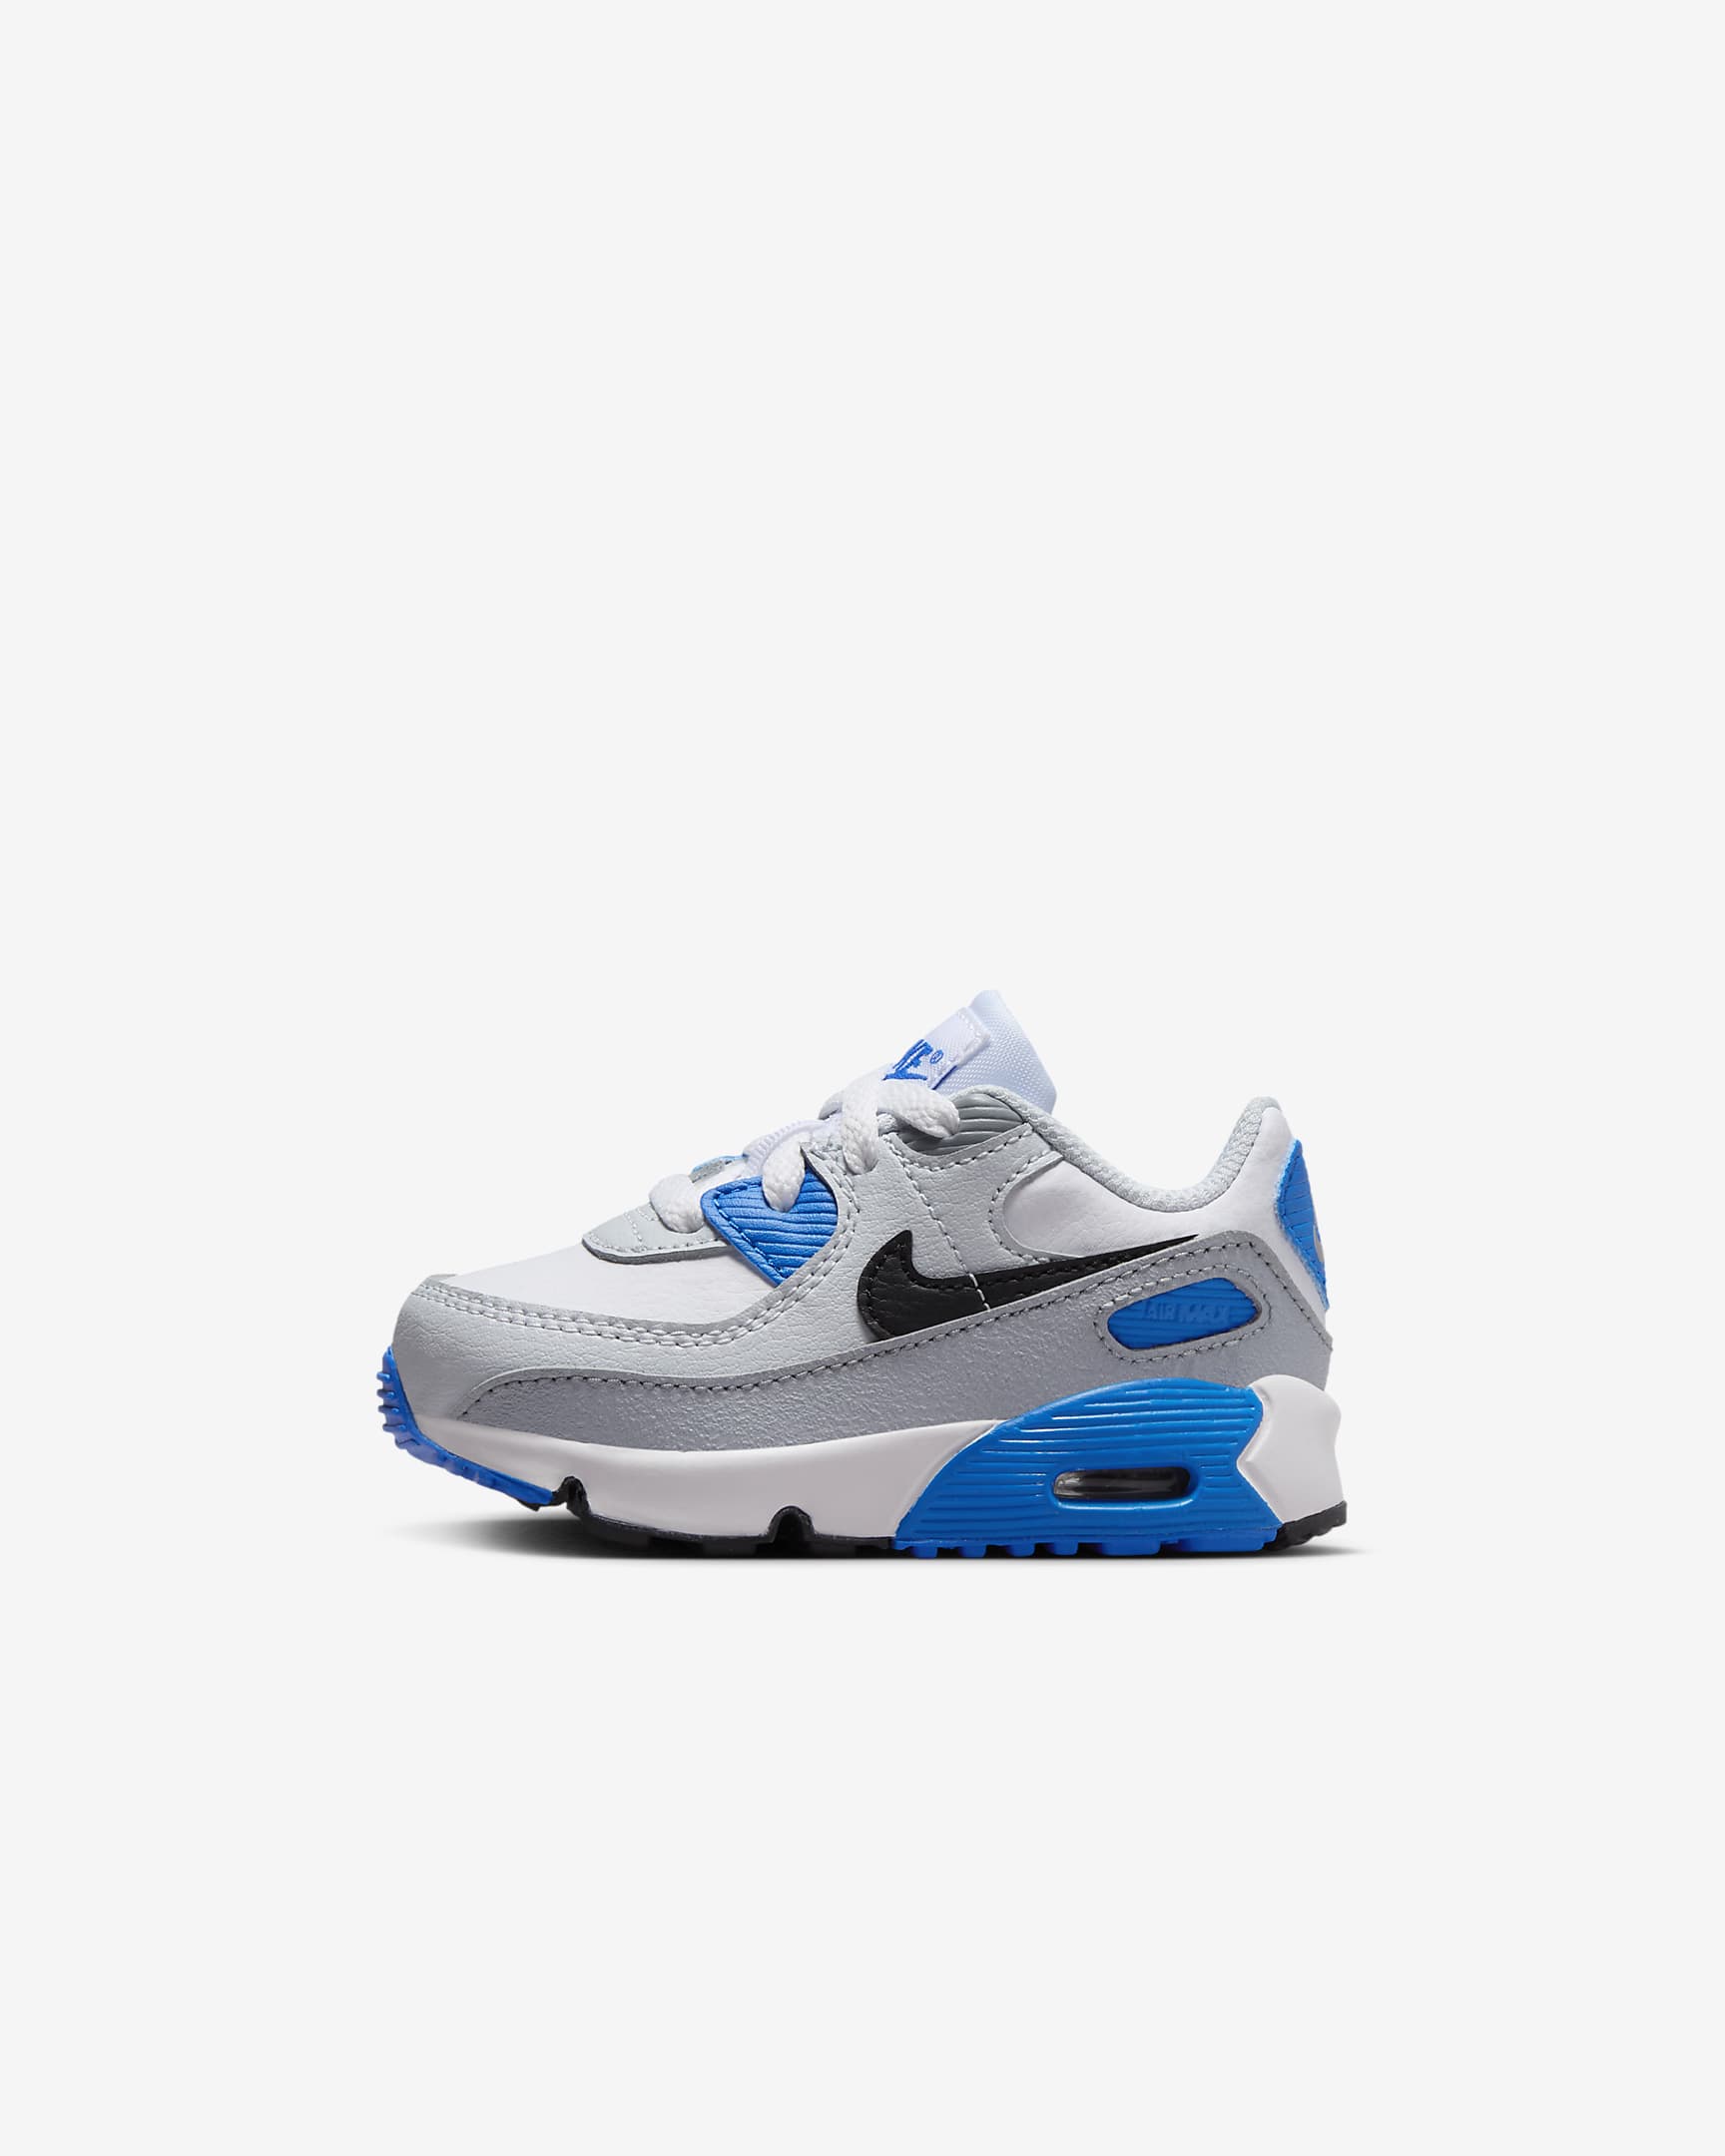 Nike Air Max 90 LTR Baby/Toddler Shoes. Nike IL